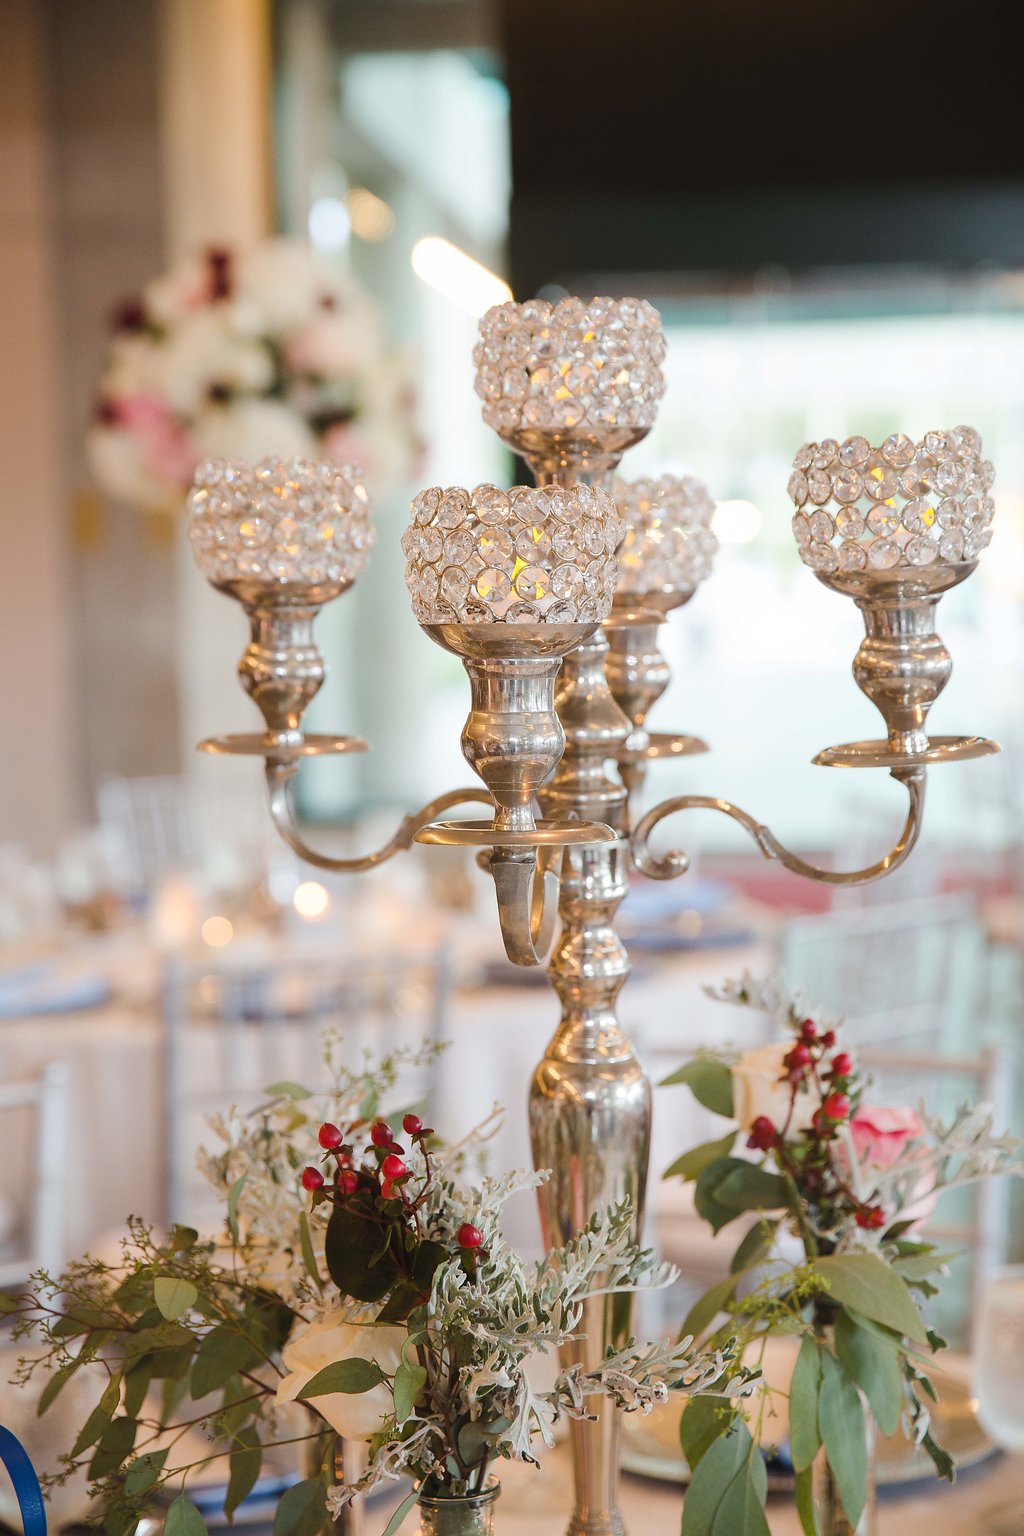 Wedding Reception Decor, Silver and Crystal Candlestick Holder, Greenery and Red Flowers | Tampa Bay Photographer Marc Edwards Photography